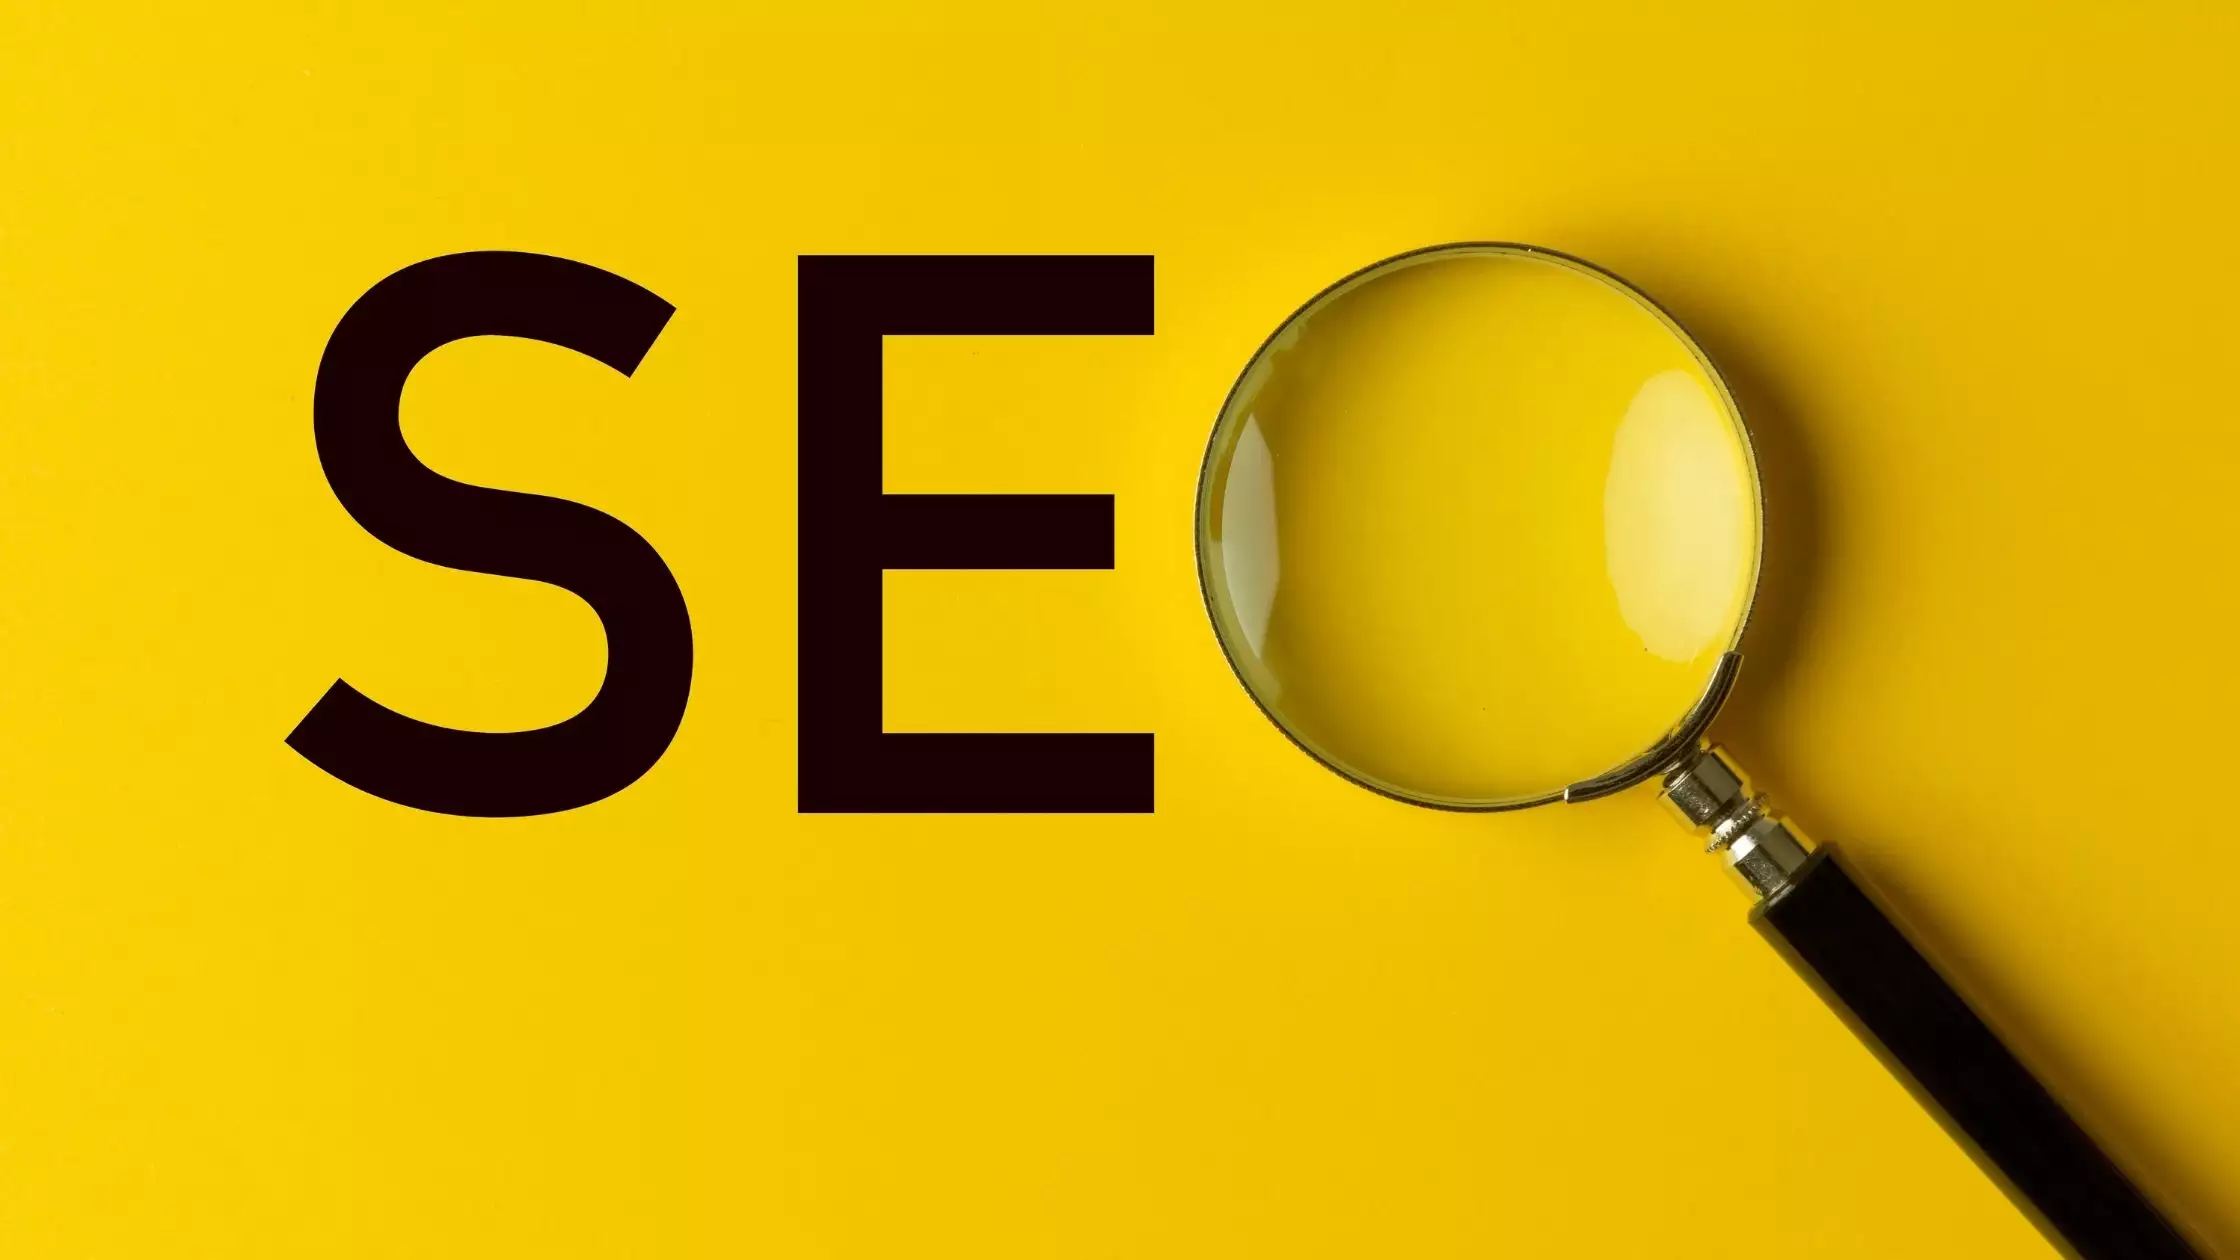 What is a good SEO score?